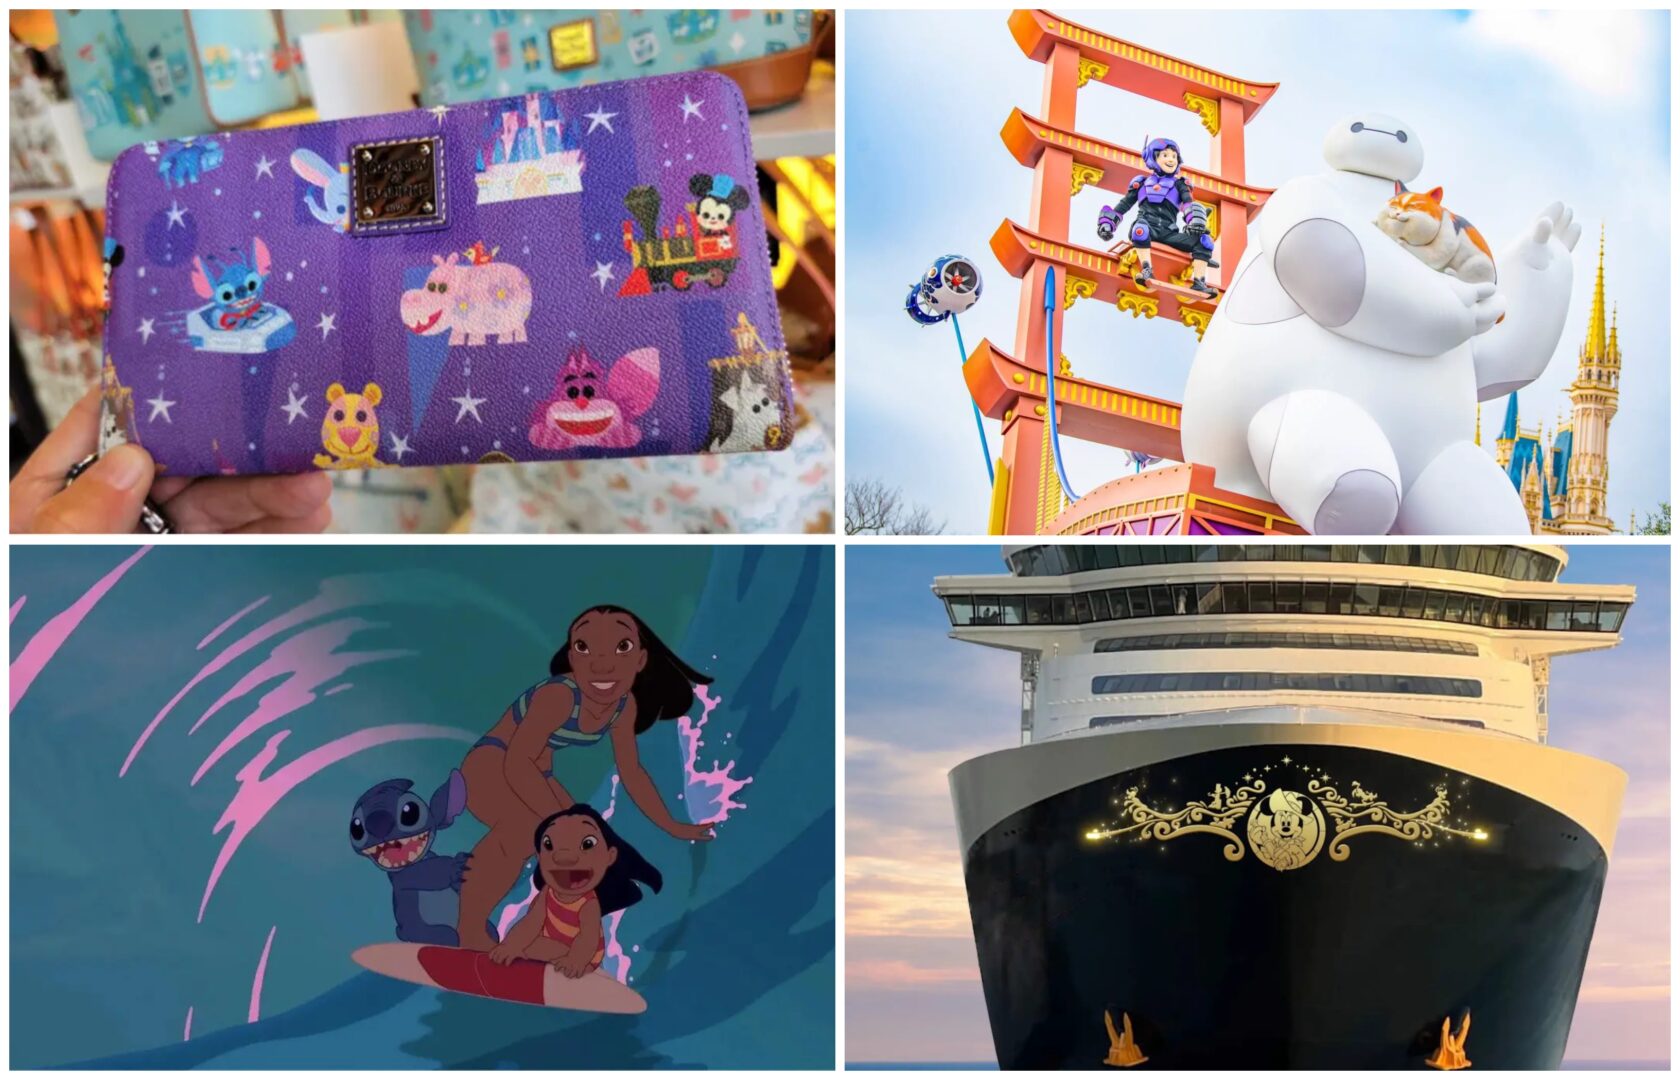 Disney News Highlights: Harmonious Barges Being Dismantled, Disney Treasure Fronted by Minnie Mouse, Disney World Park Hours Adjusted, Splash Mountain Closing Date Announced